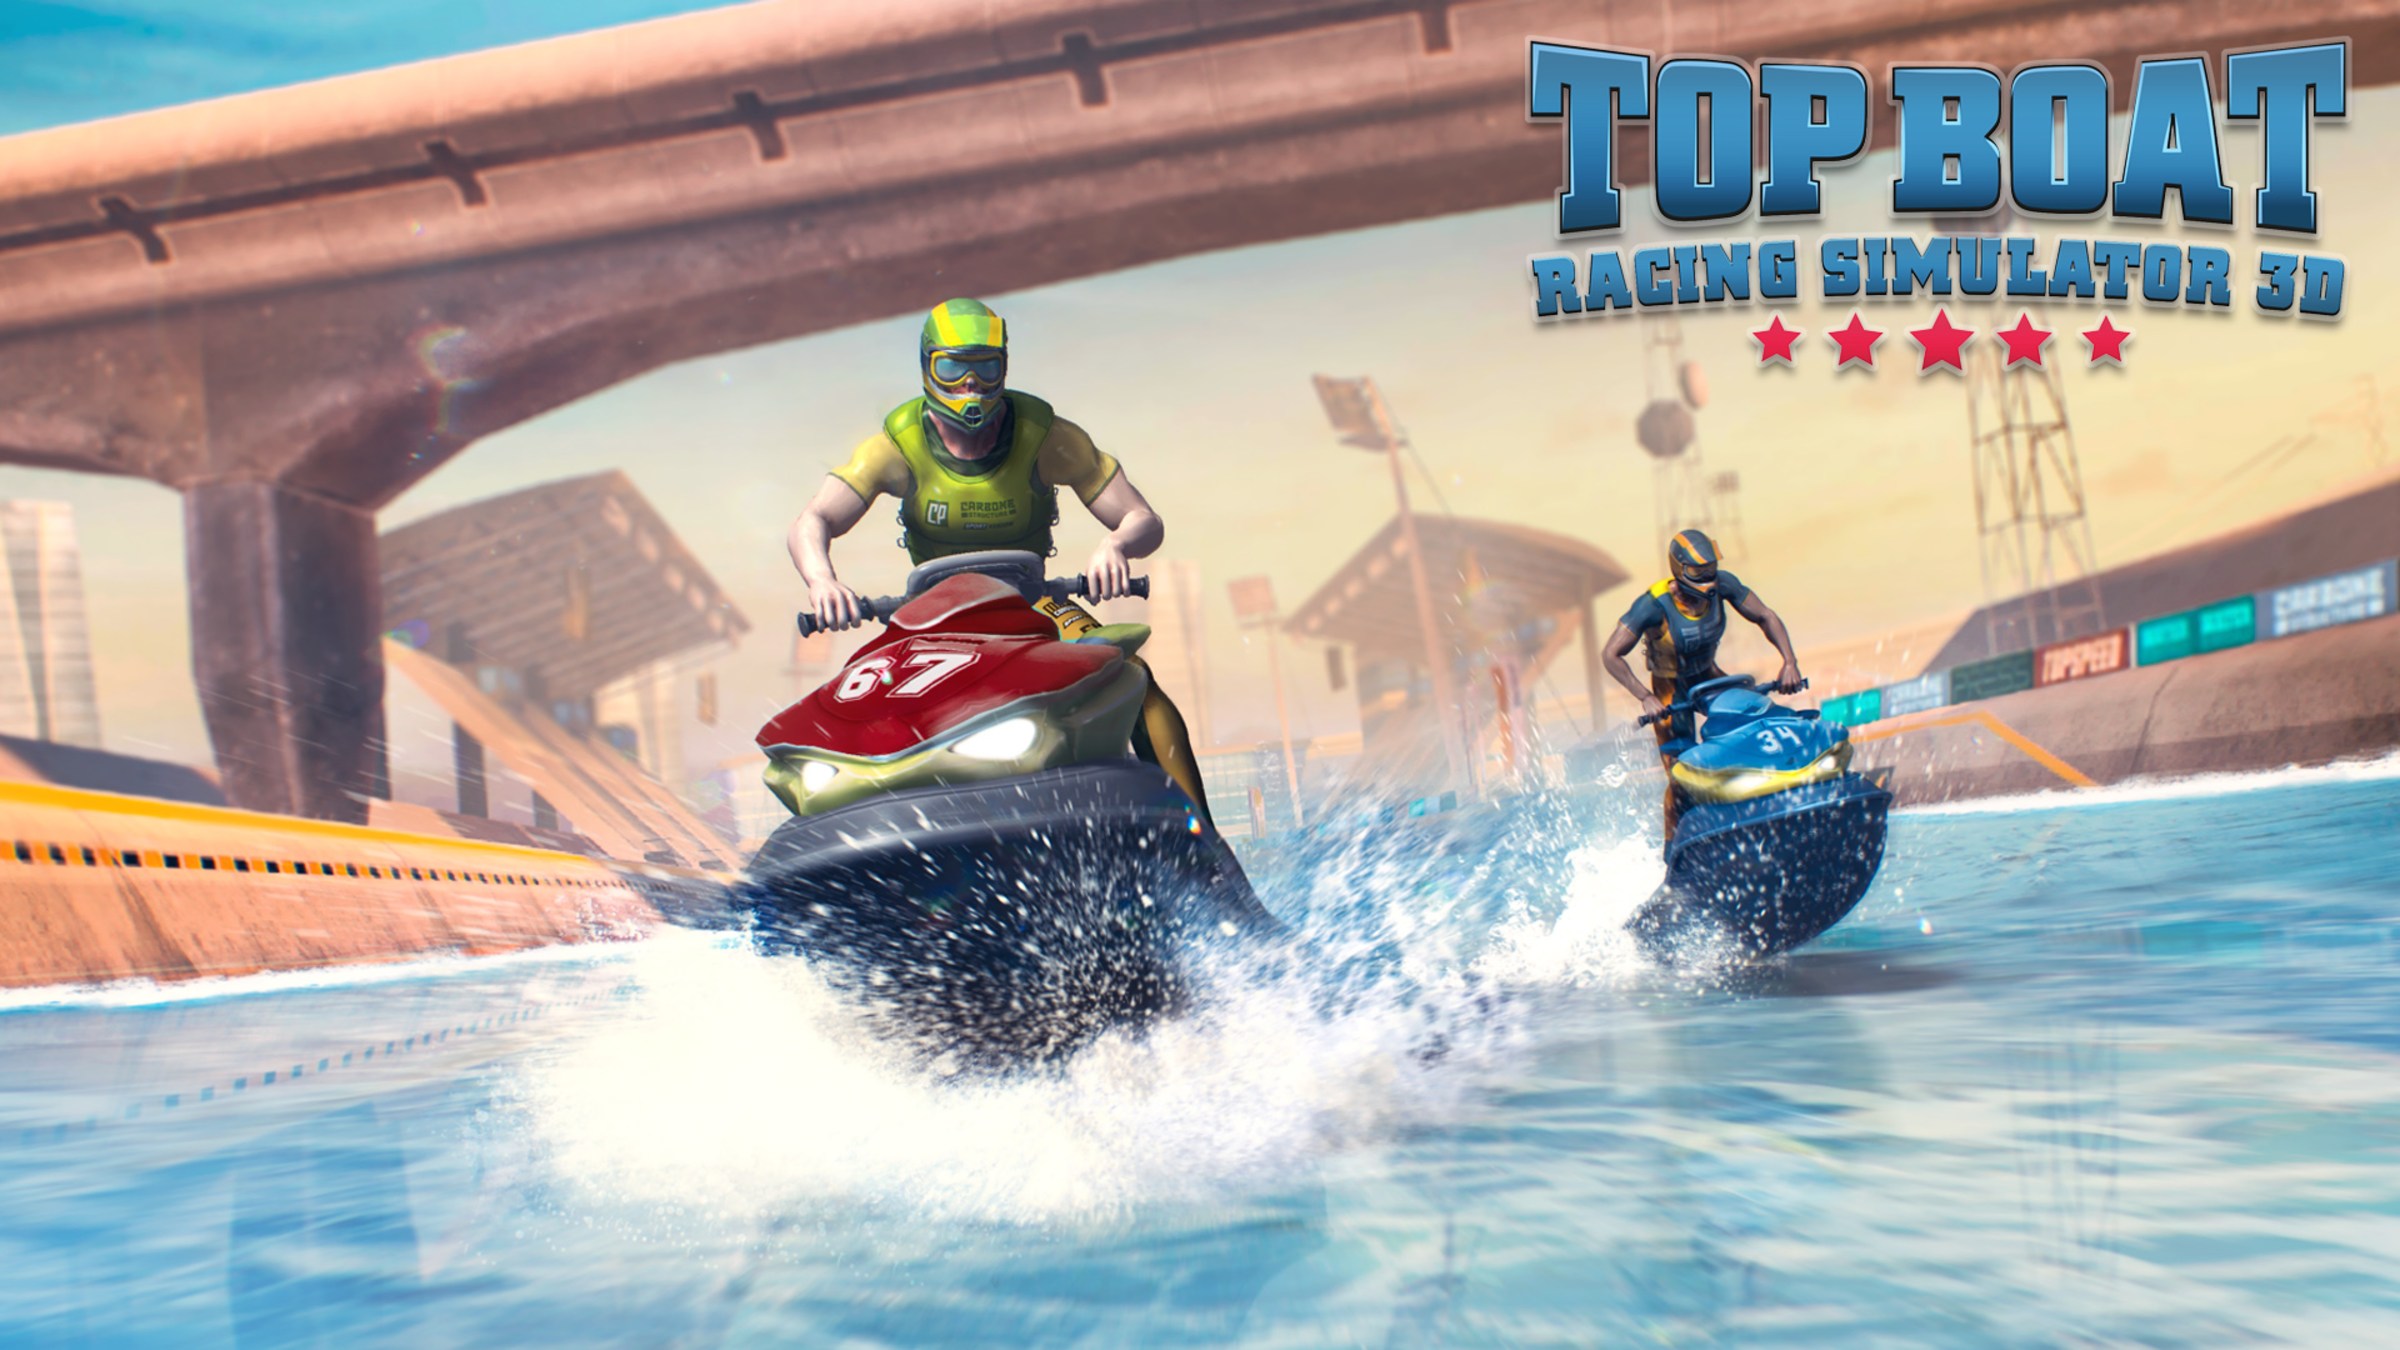 Top Boat: Racing Simulator 3D for Nintendo Switch - Nintendo Official Site